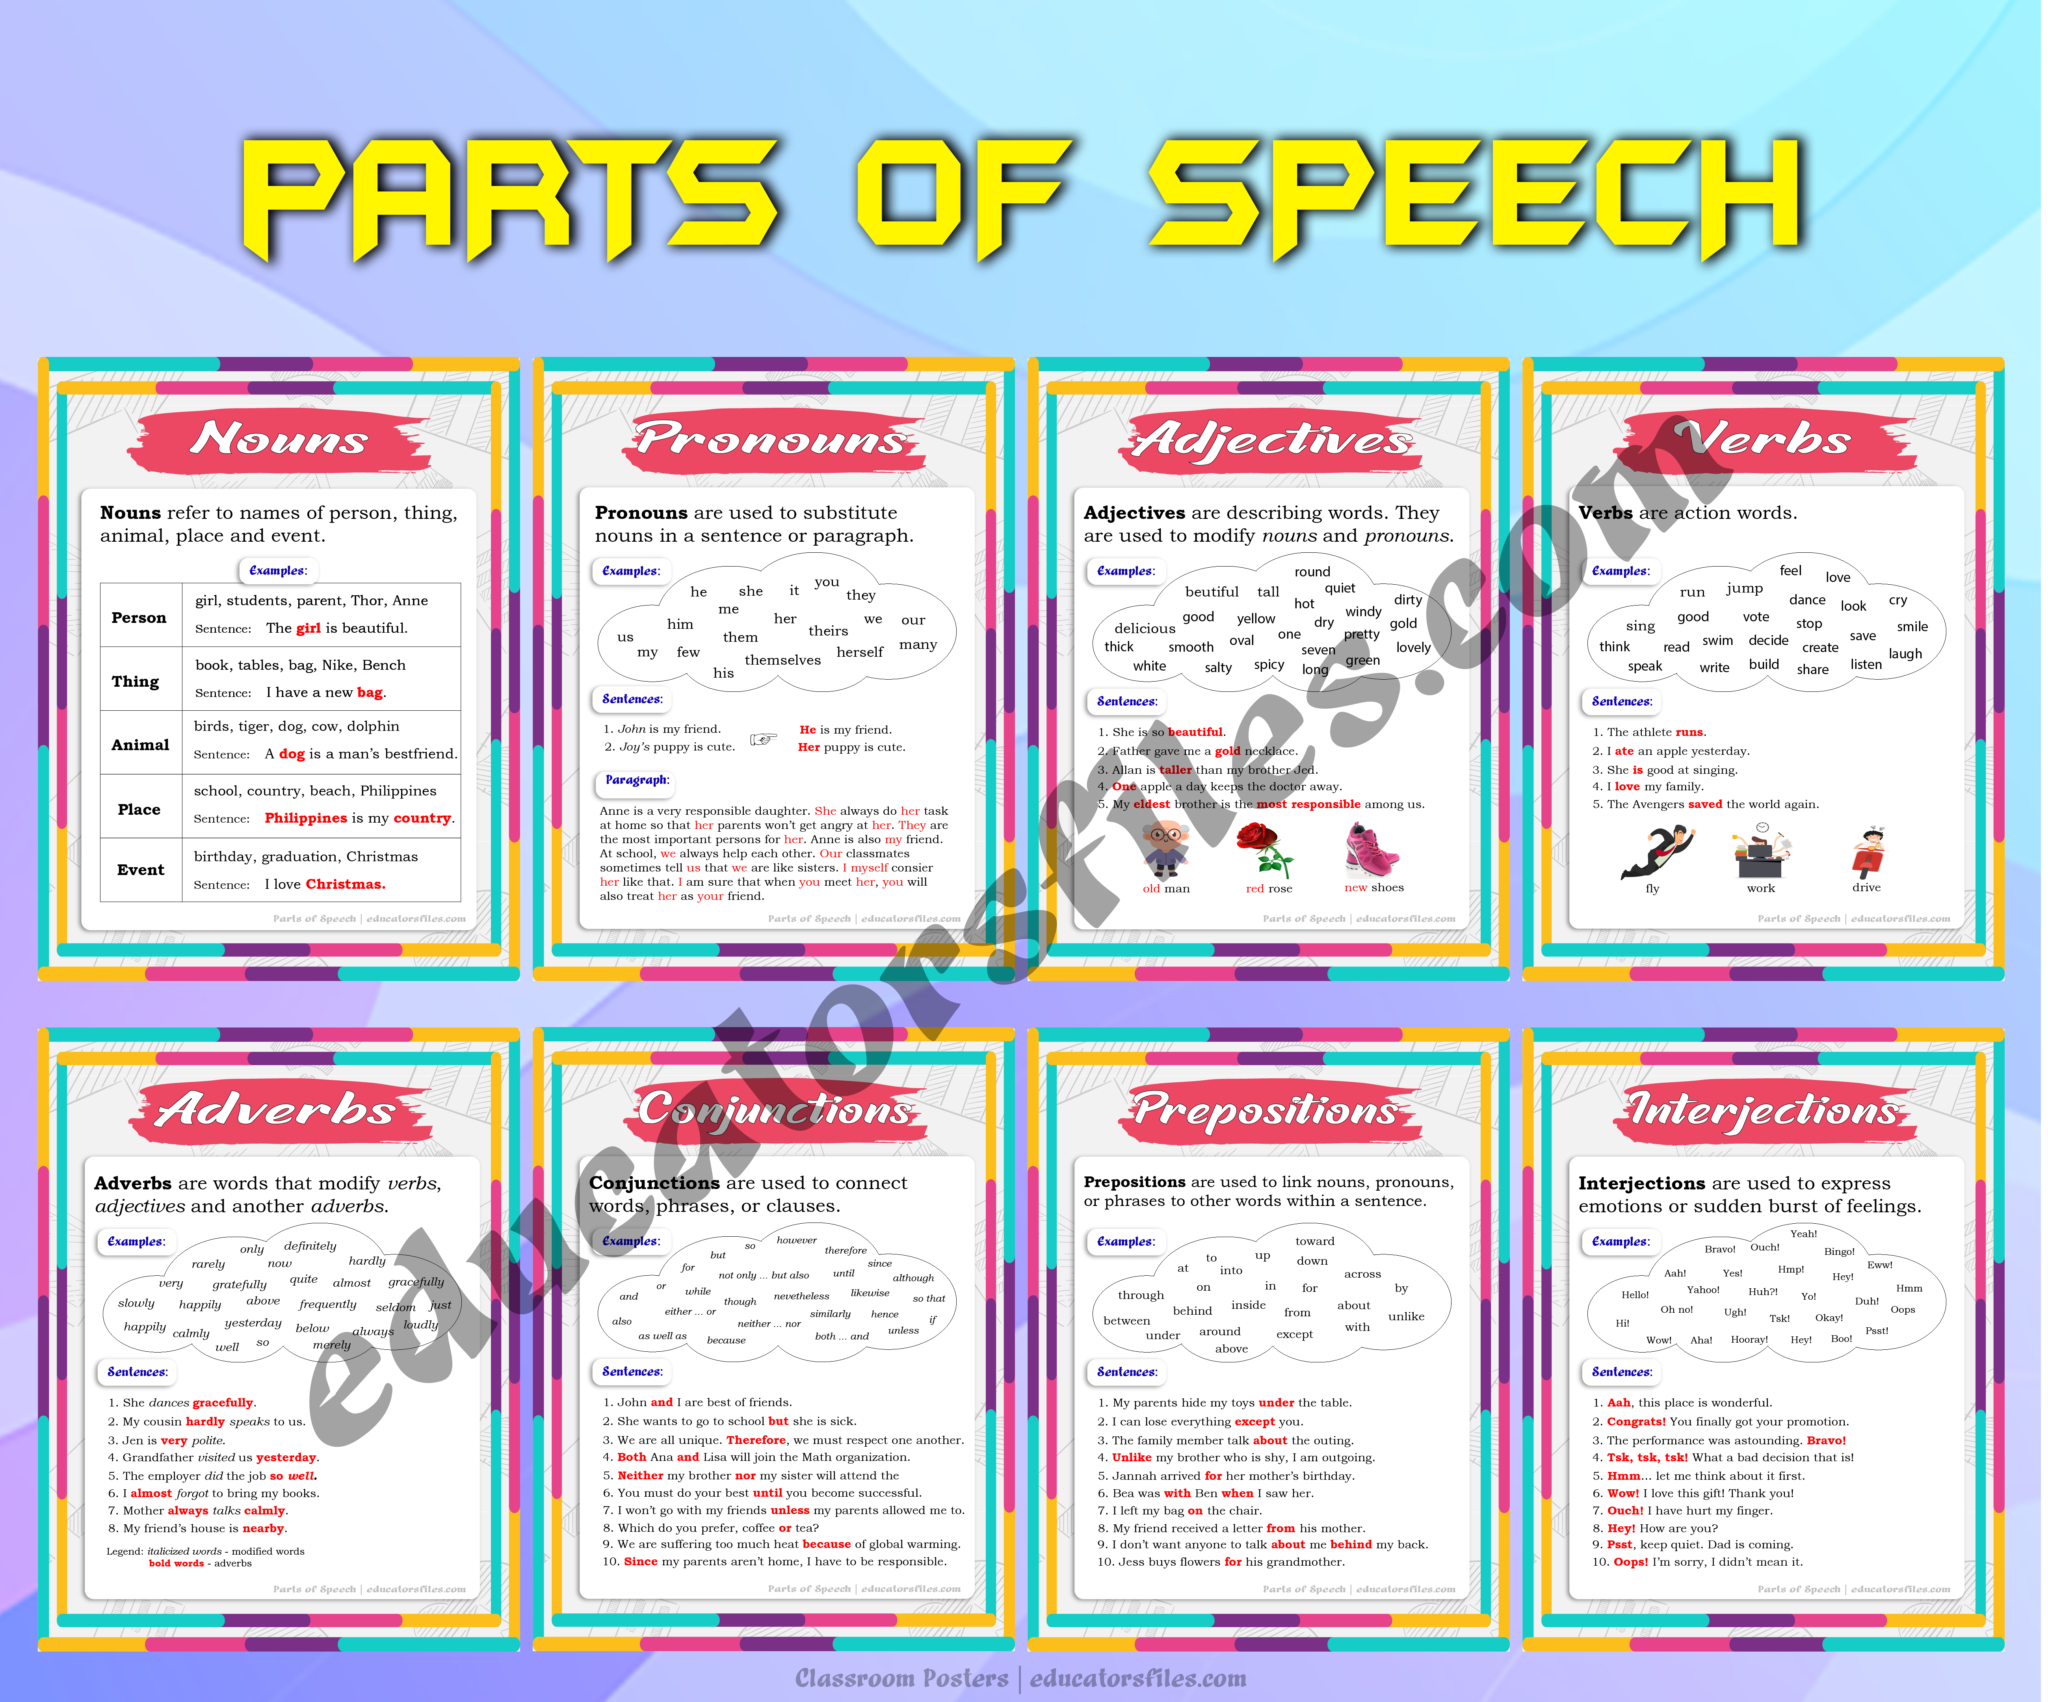 Parts of Speech (Classroom Posters)